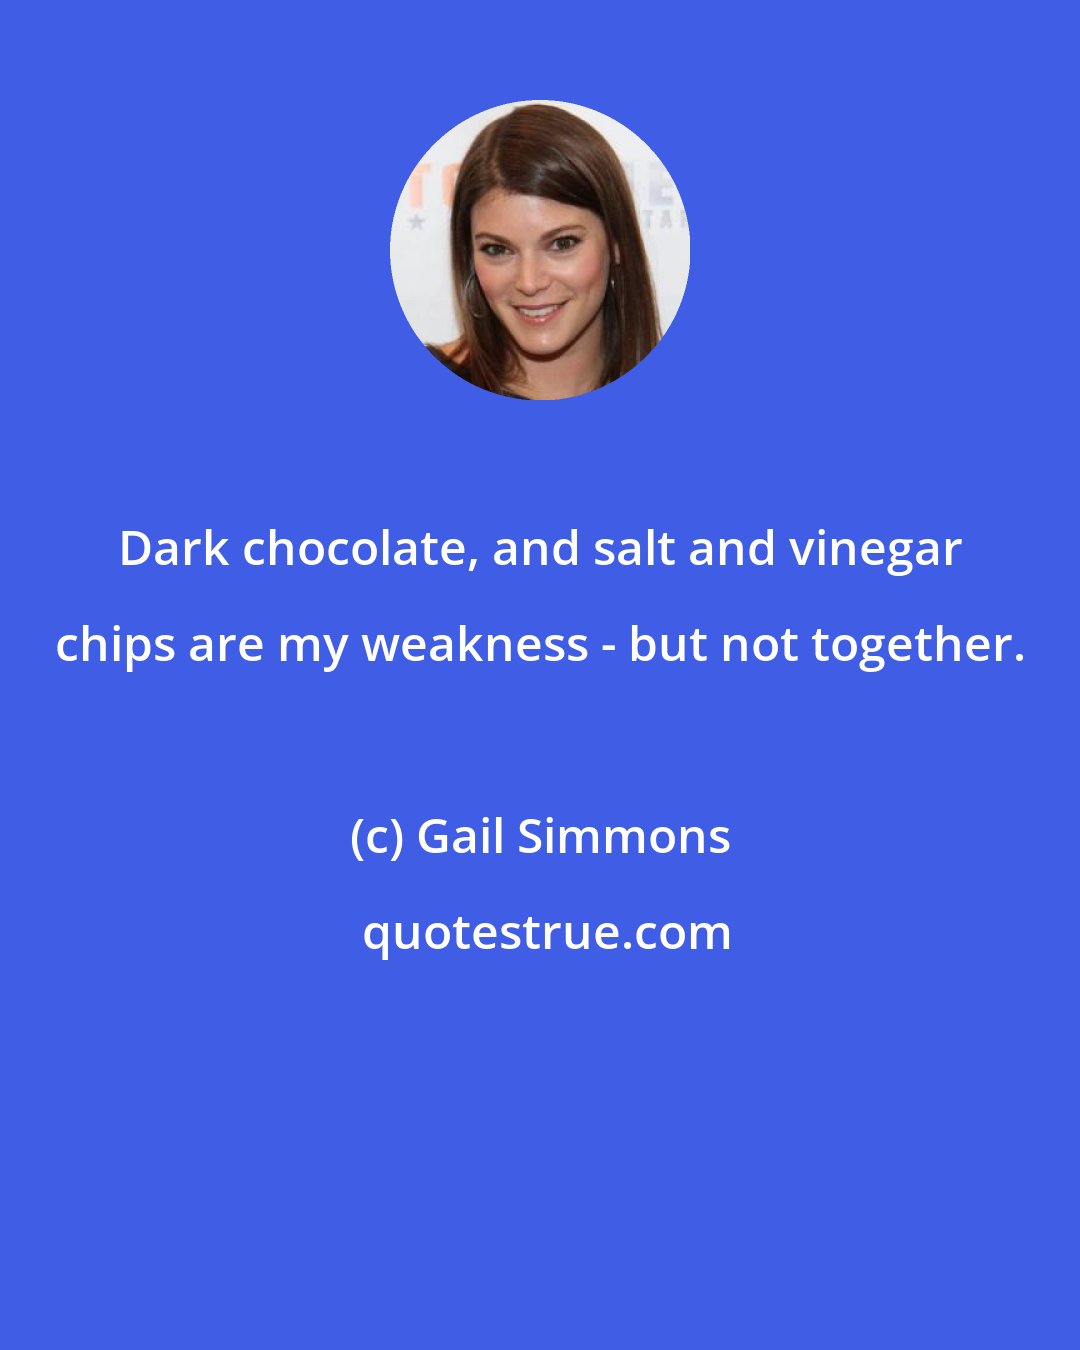 Gail Simmons: Dark chocolate, and salt and vinegar chips are my weakness - but not together.